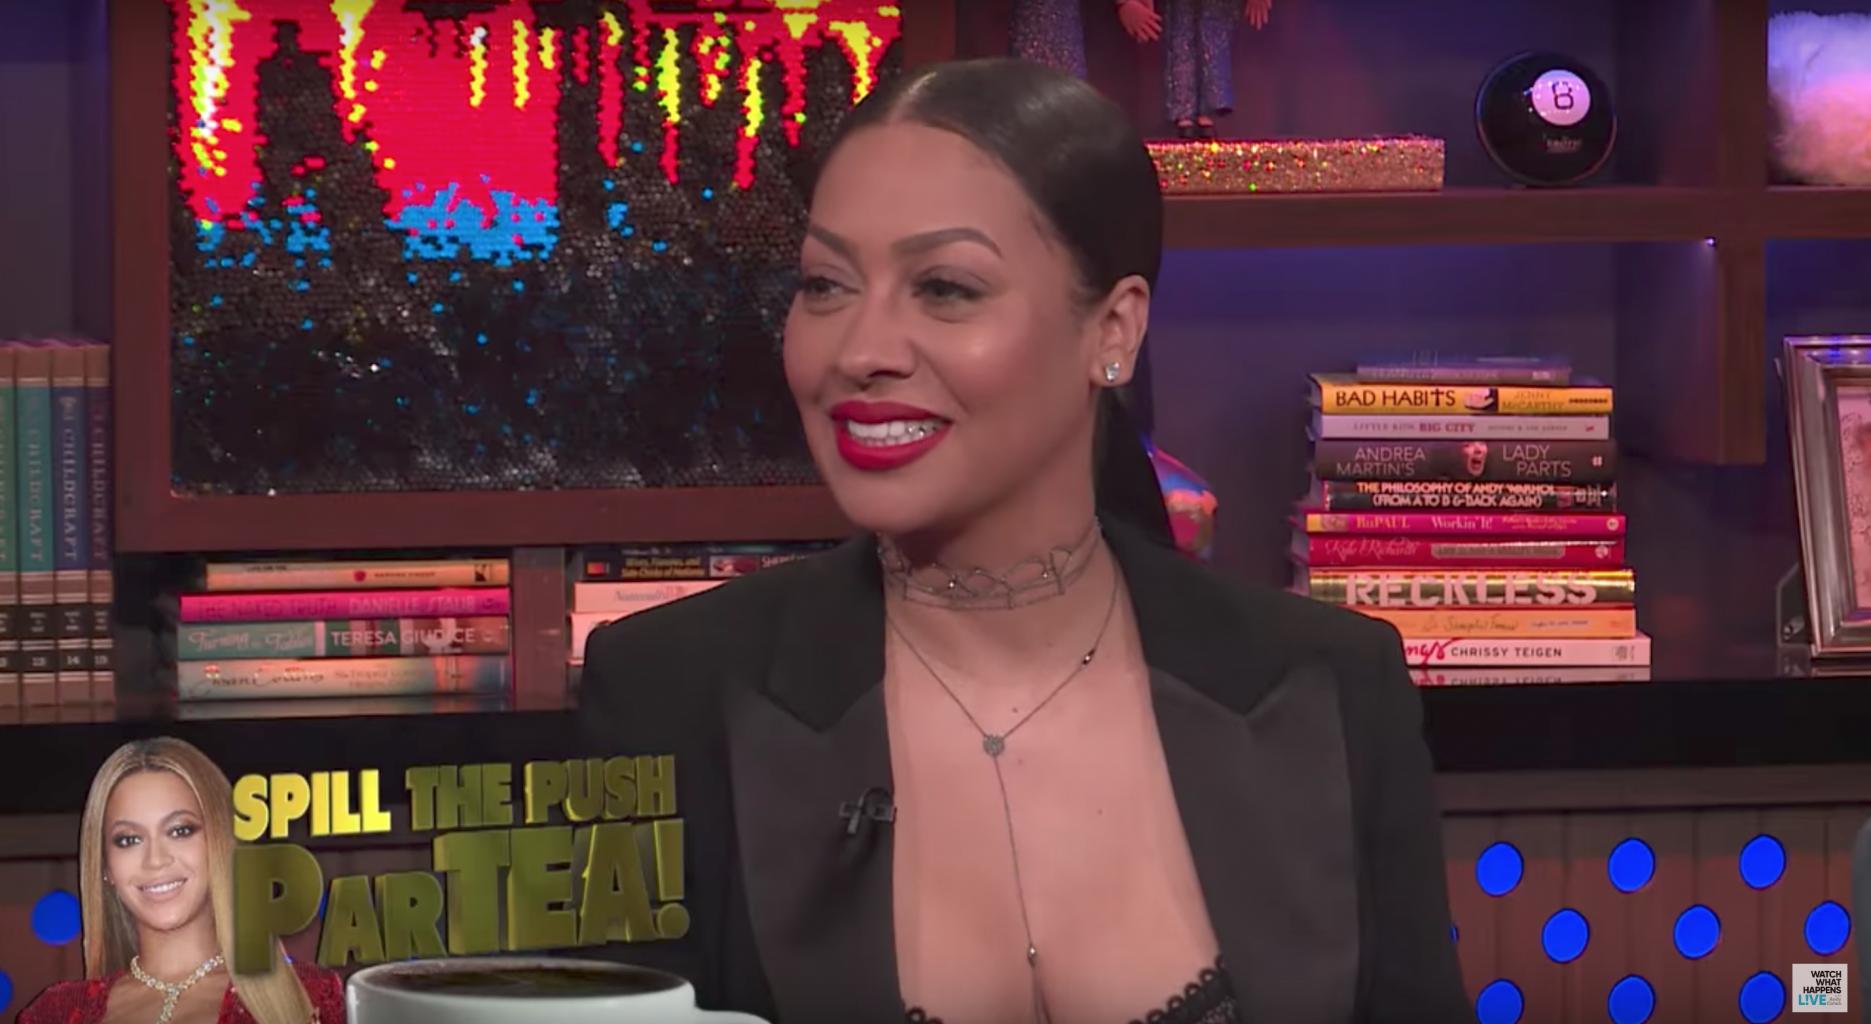 La La Anthony Stays Mostly Tight-Lipped About BeyoncÃ©'s Push Party â€“ but Reveals Ms. Tina Got 'Turnt'